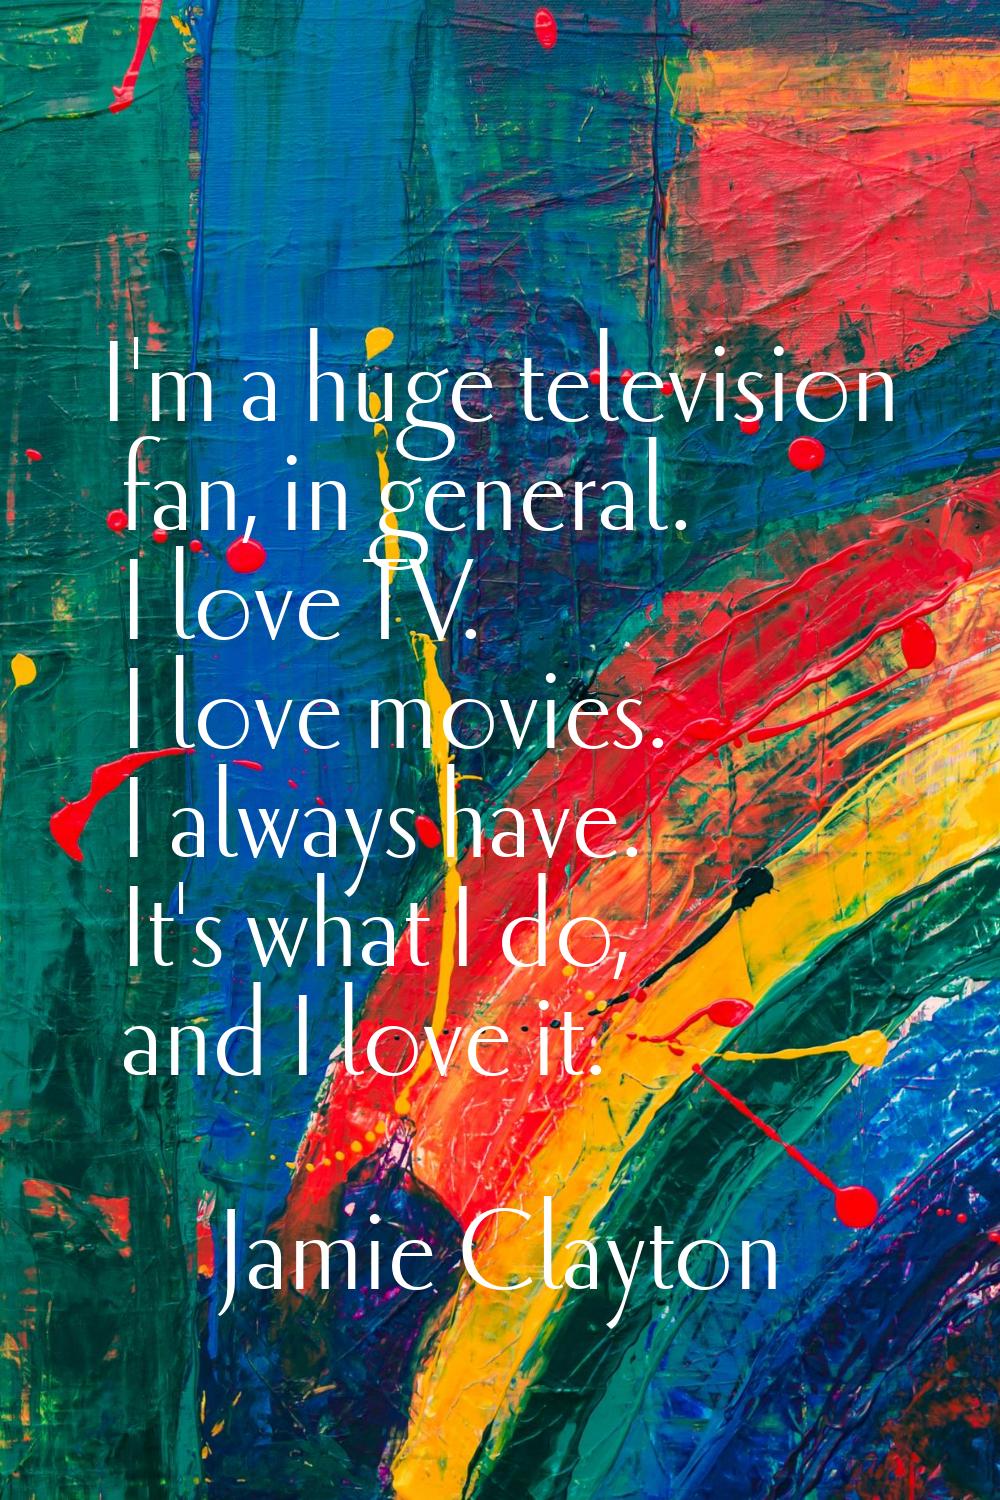 I'm a huge television fan, in general. I love TV. I love movies. I always have. It's what I do, and